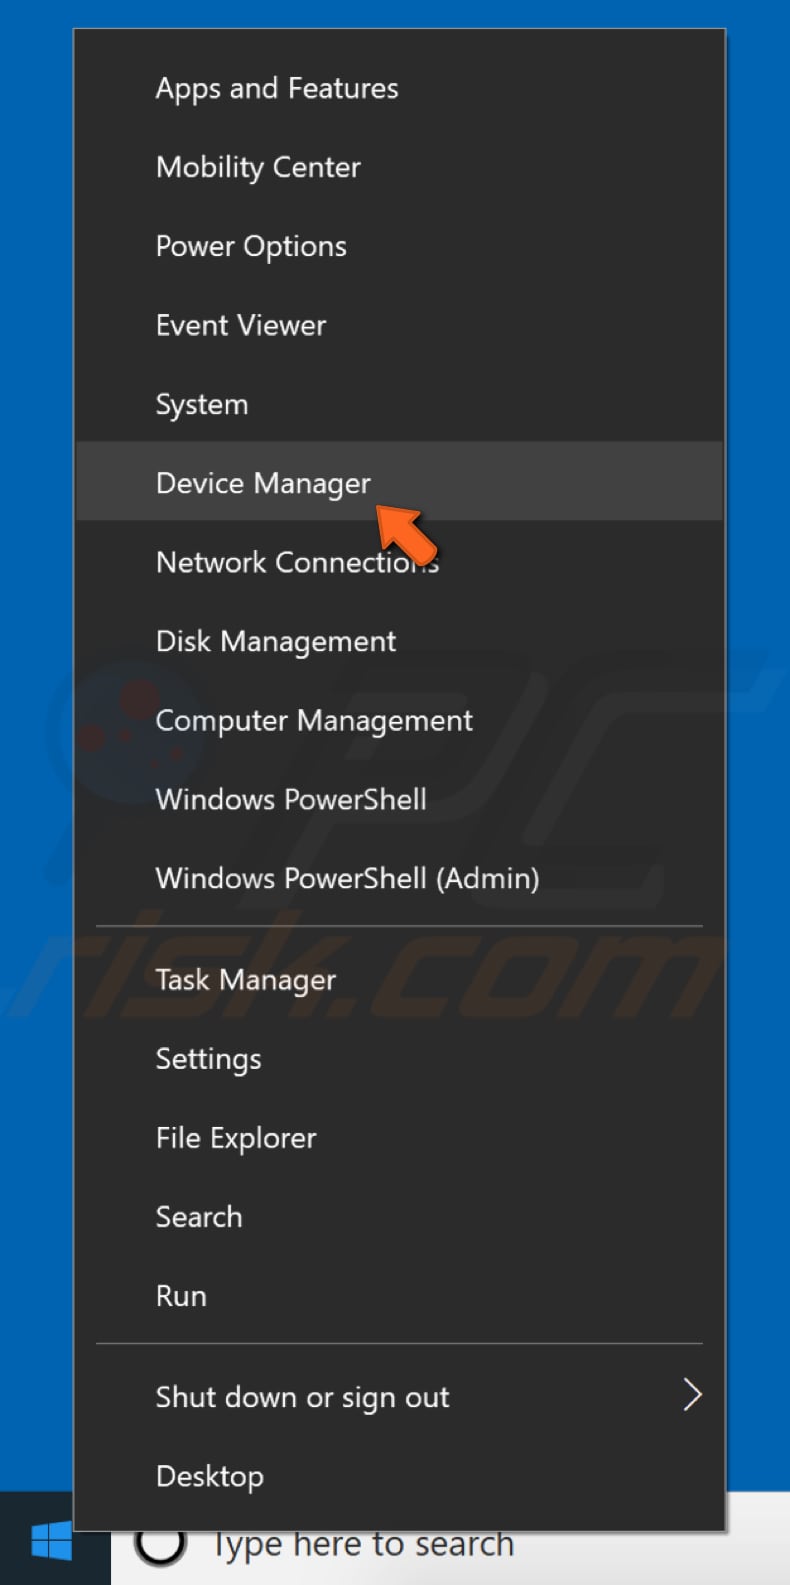 Right-click Start and select Device Manager